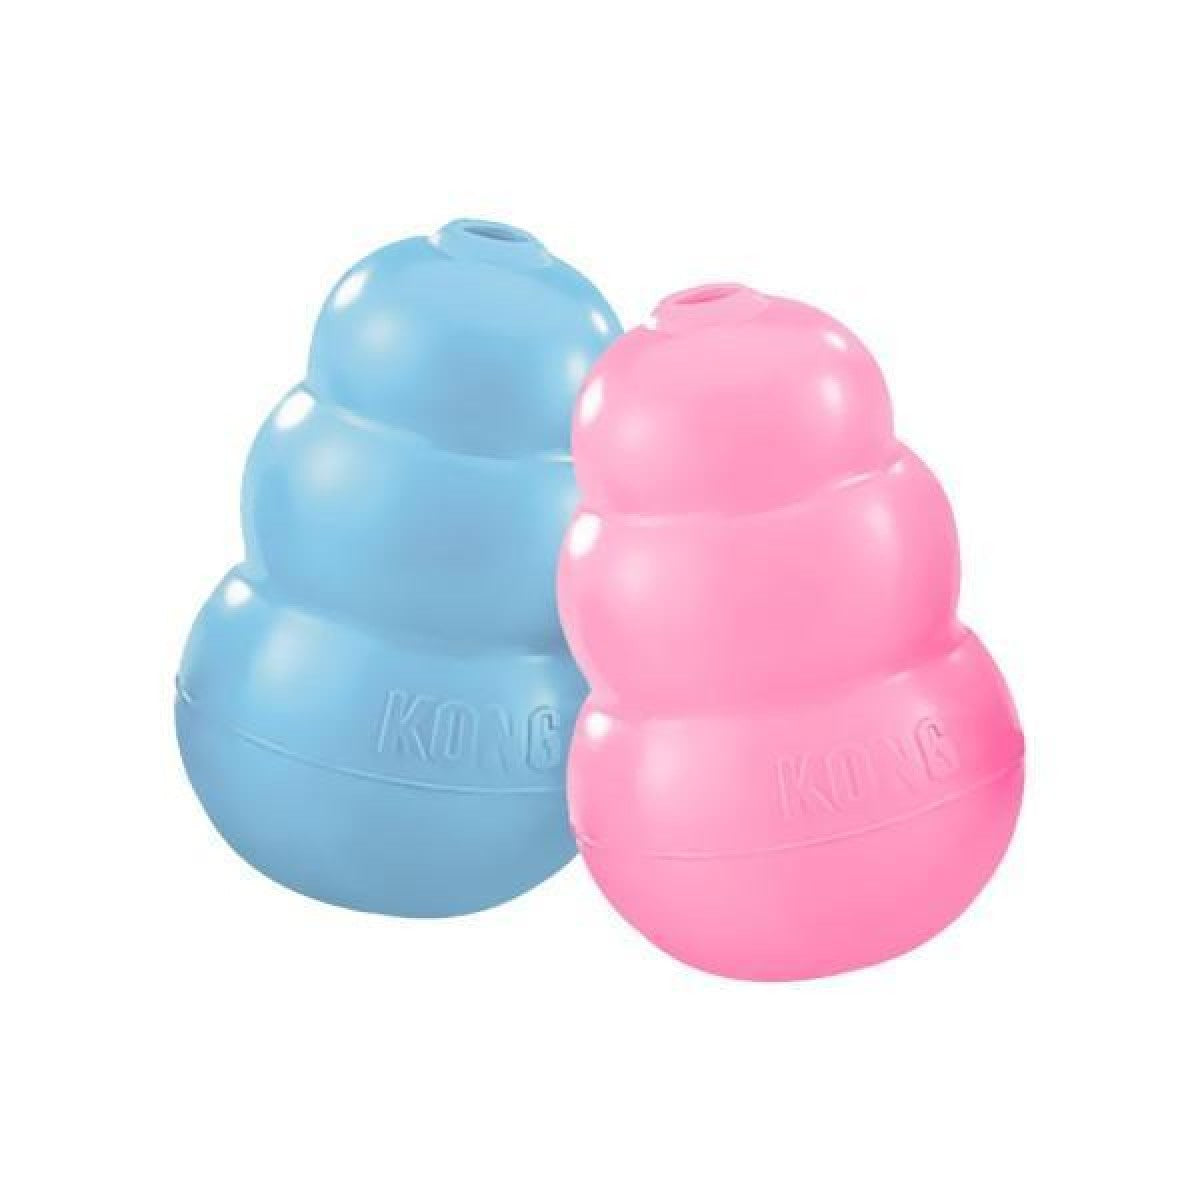 KONG® Puppy Small Dog Toy